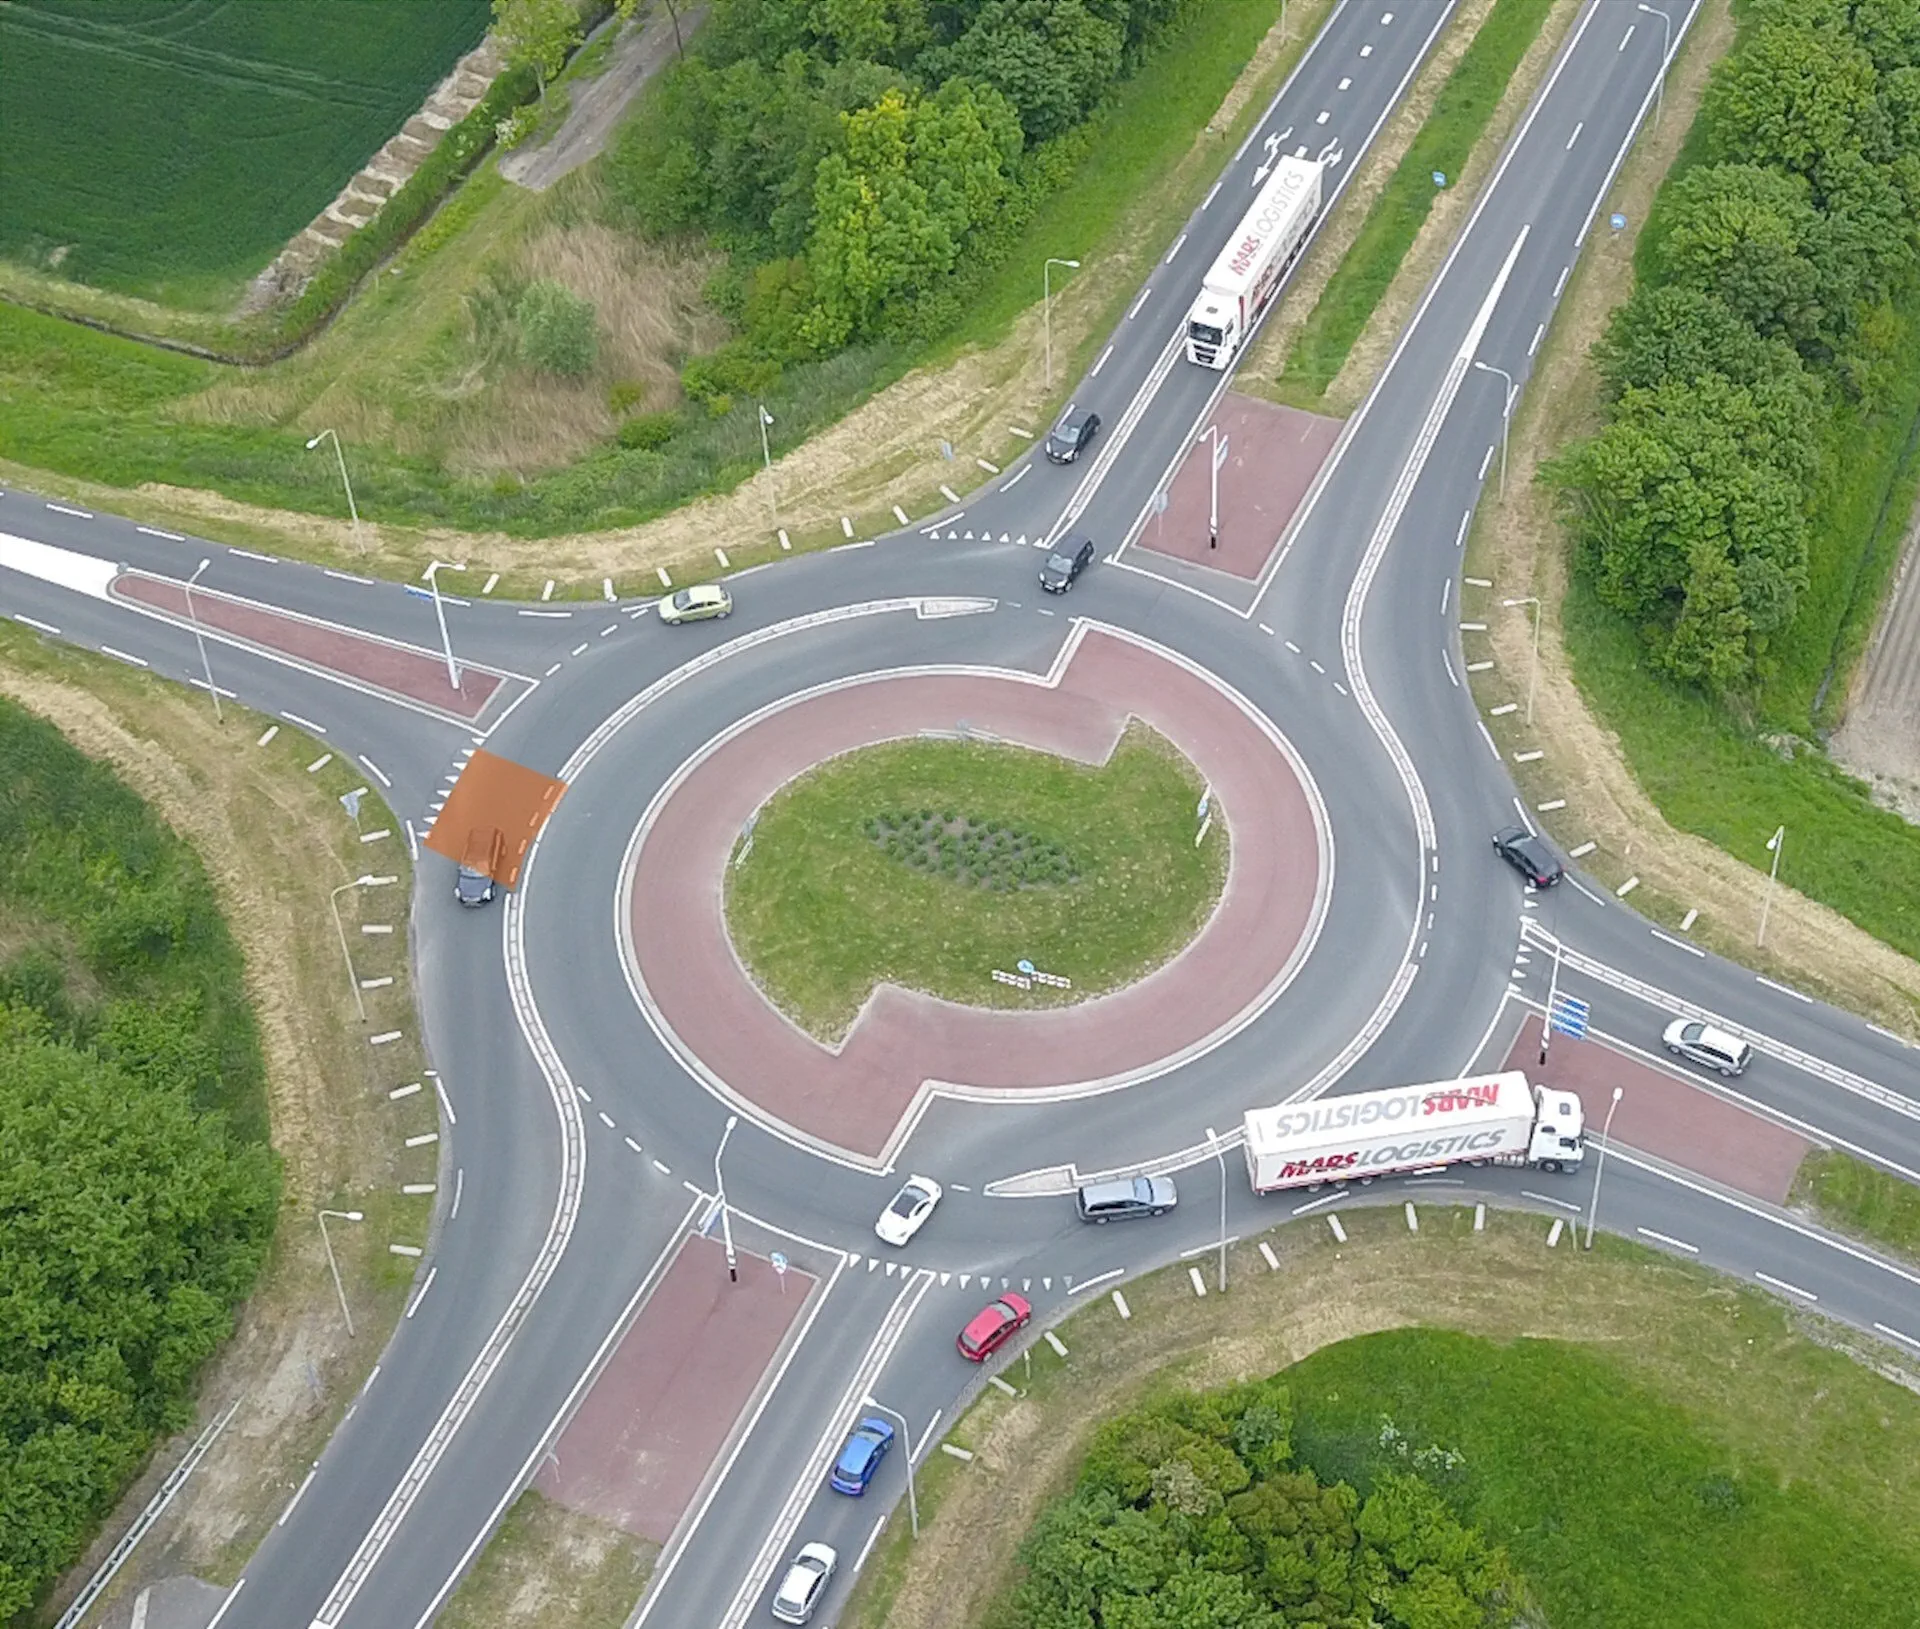 [Image: bringing-the-turbo-roundabout-to-the-us-...a46d8d56df]